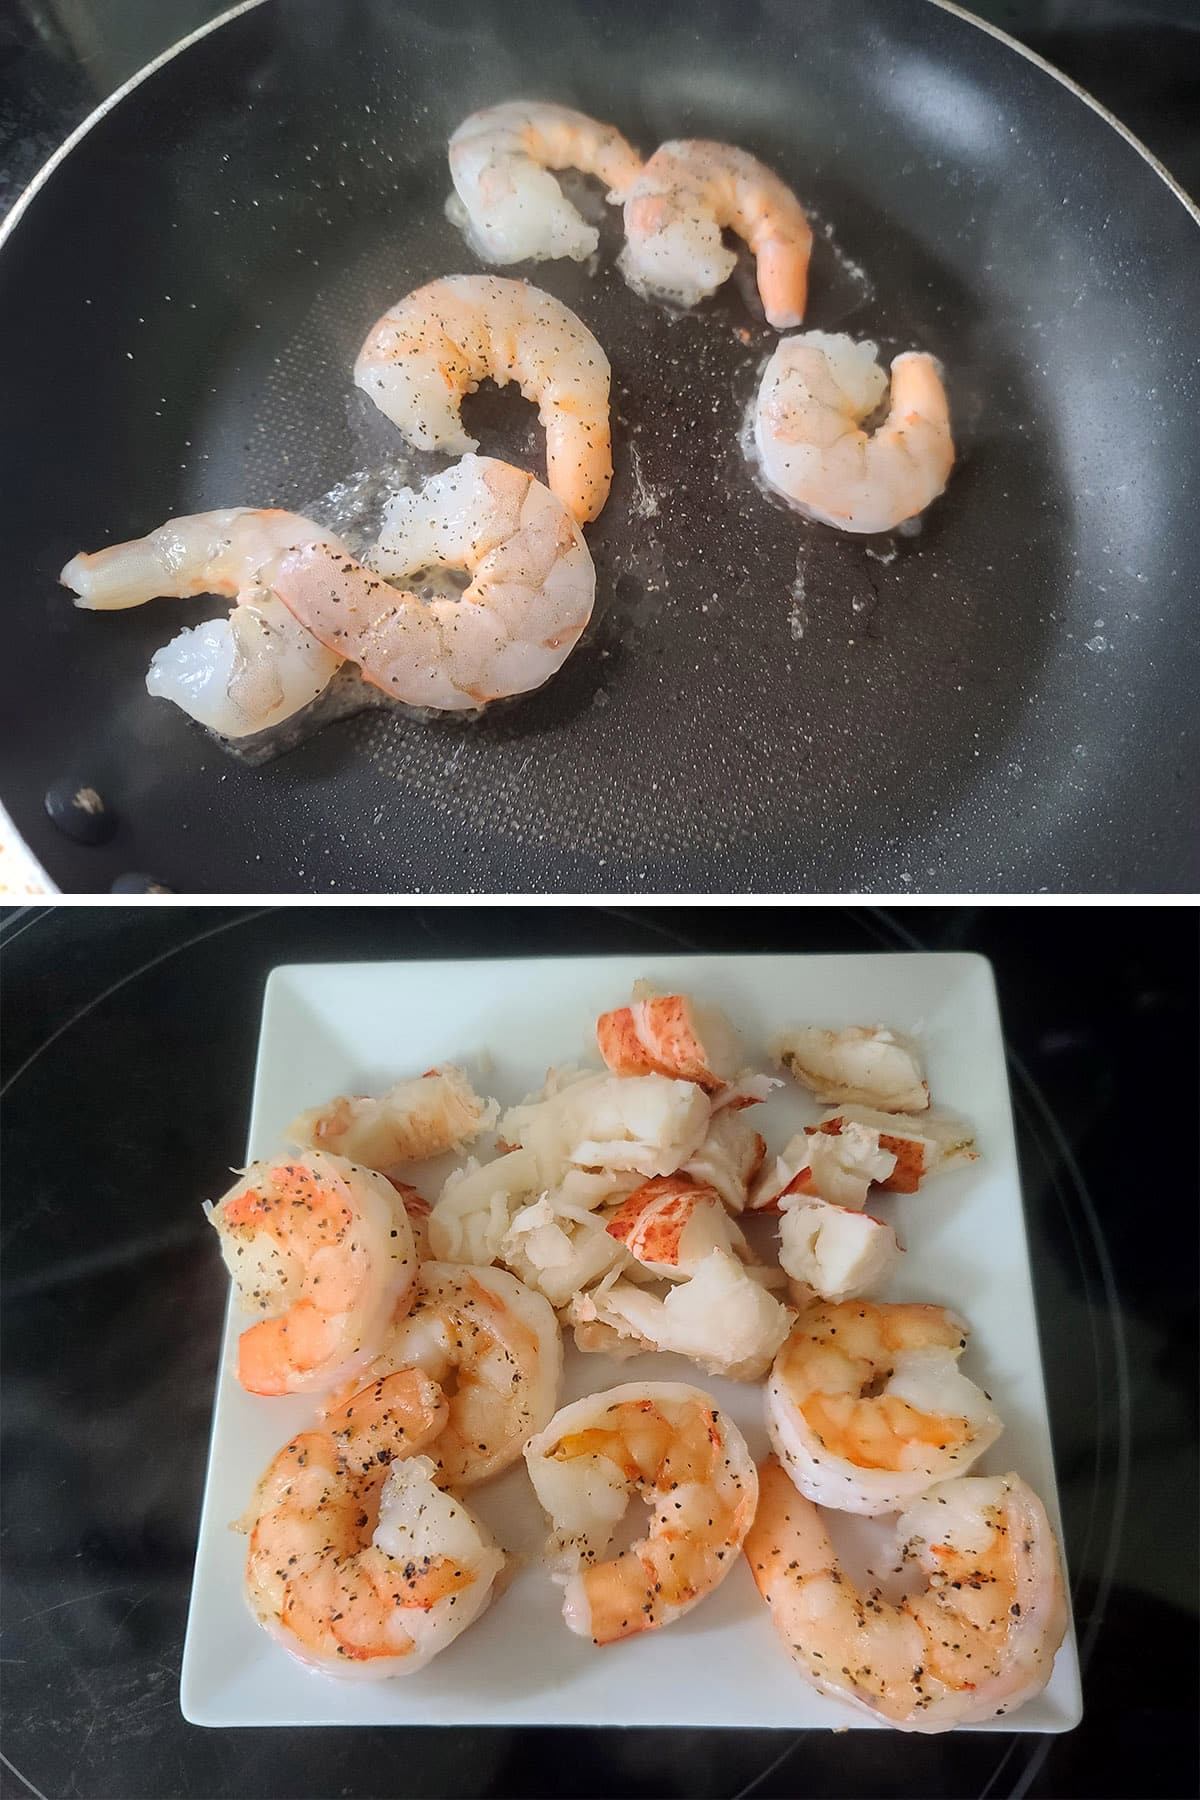 Several large shrimp in a pan, then cooked on a plate.